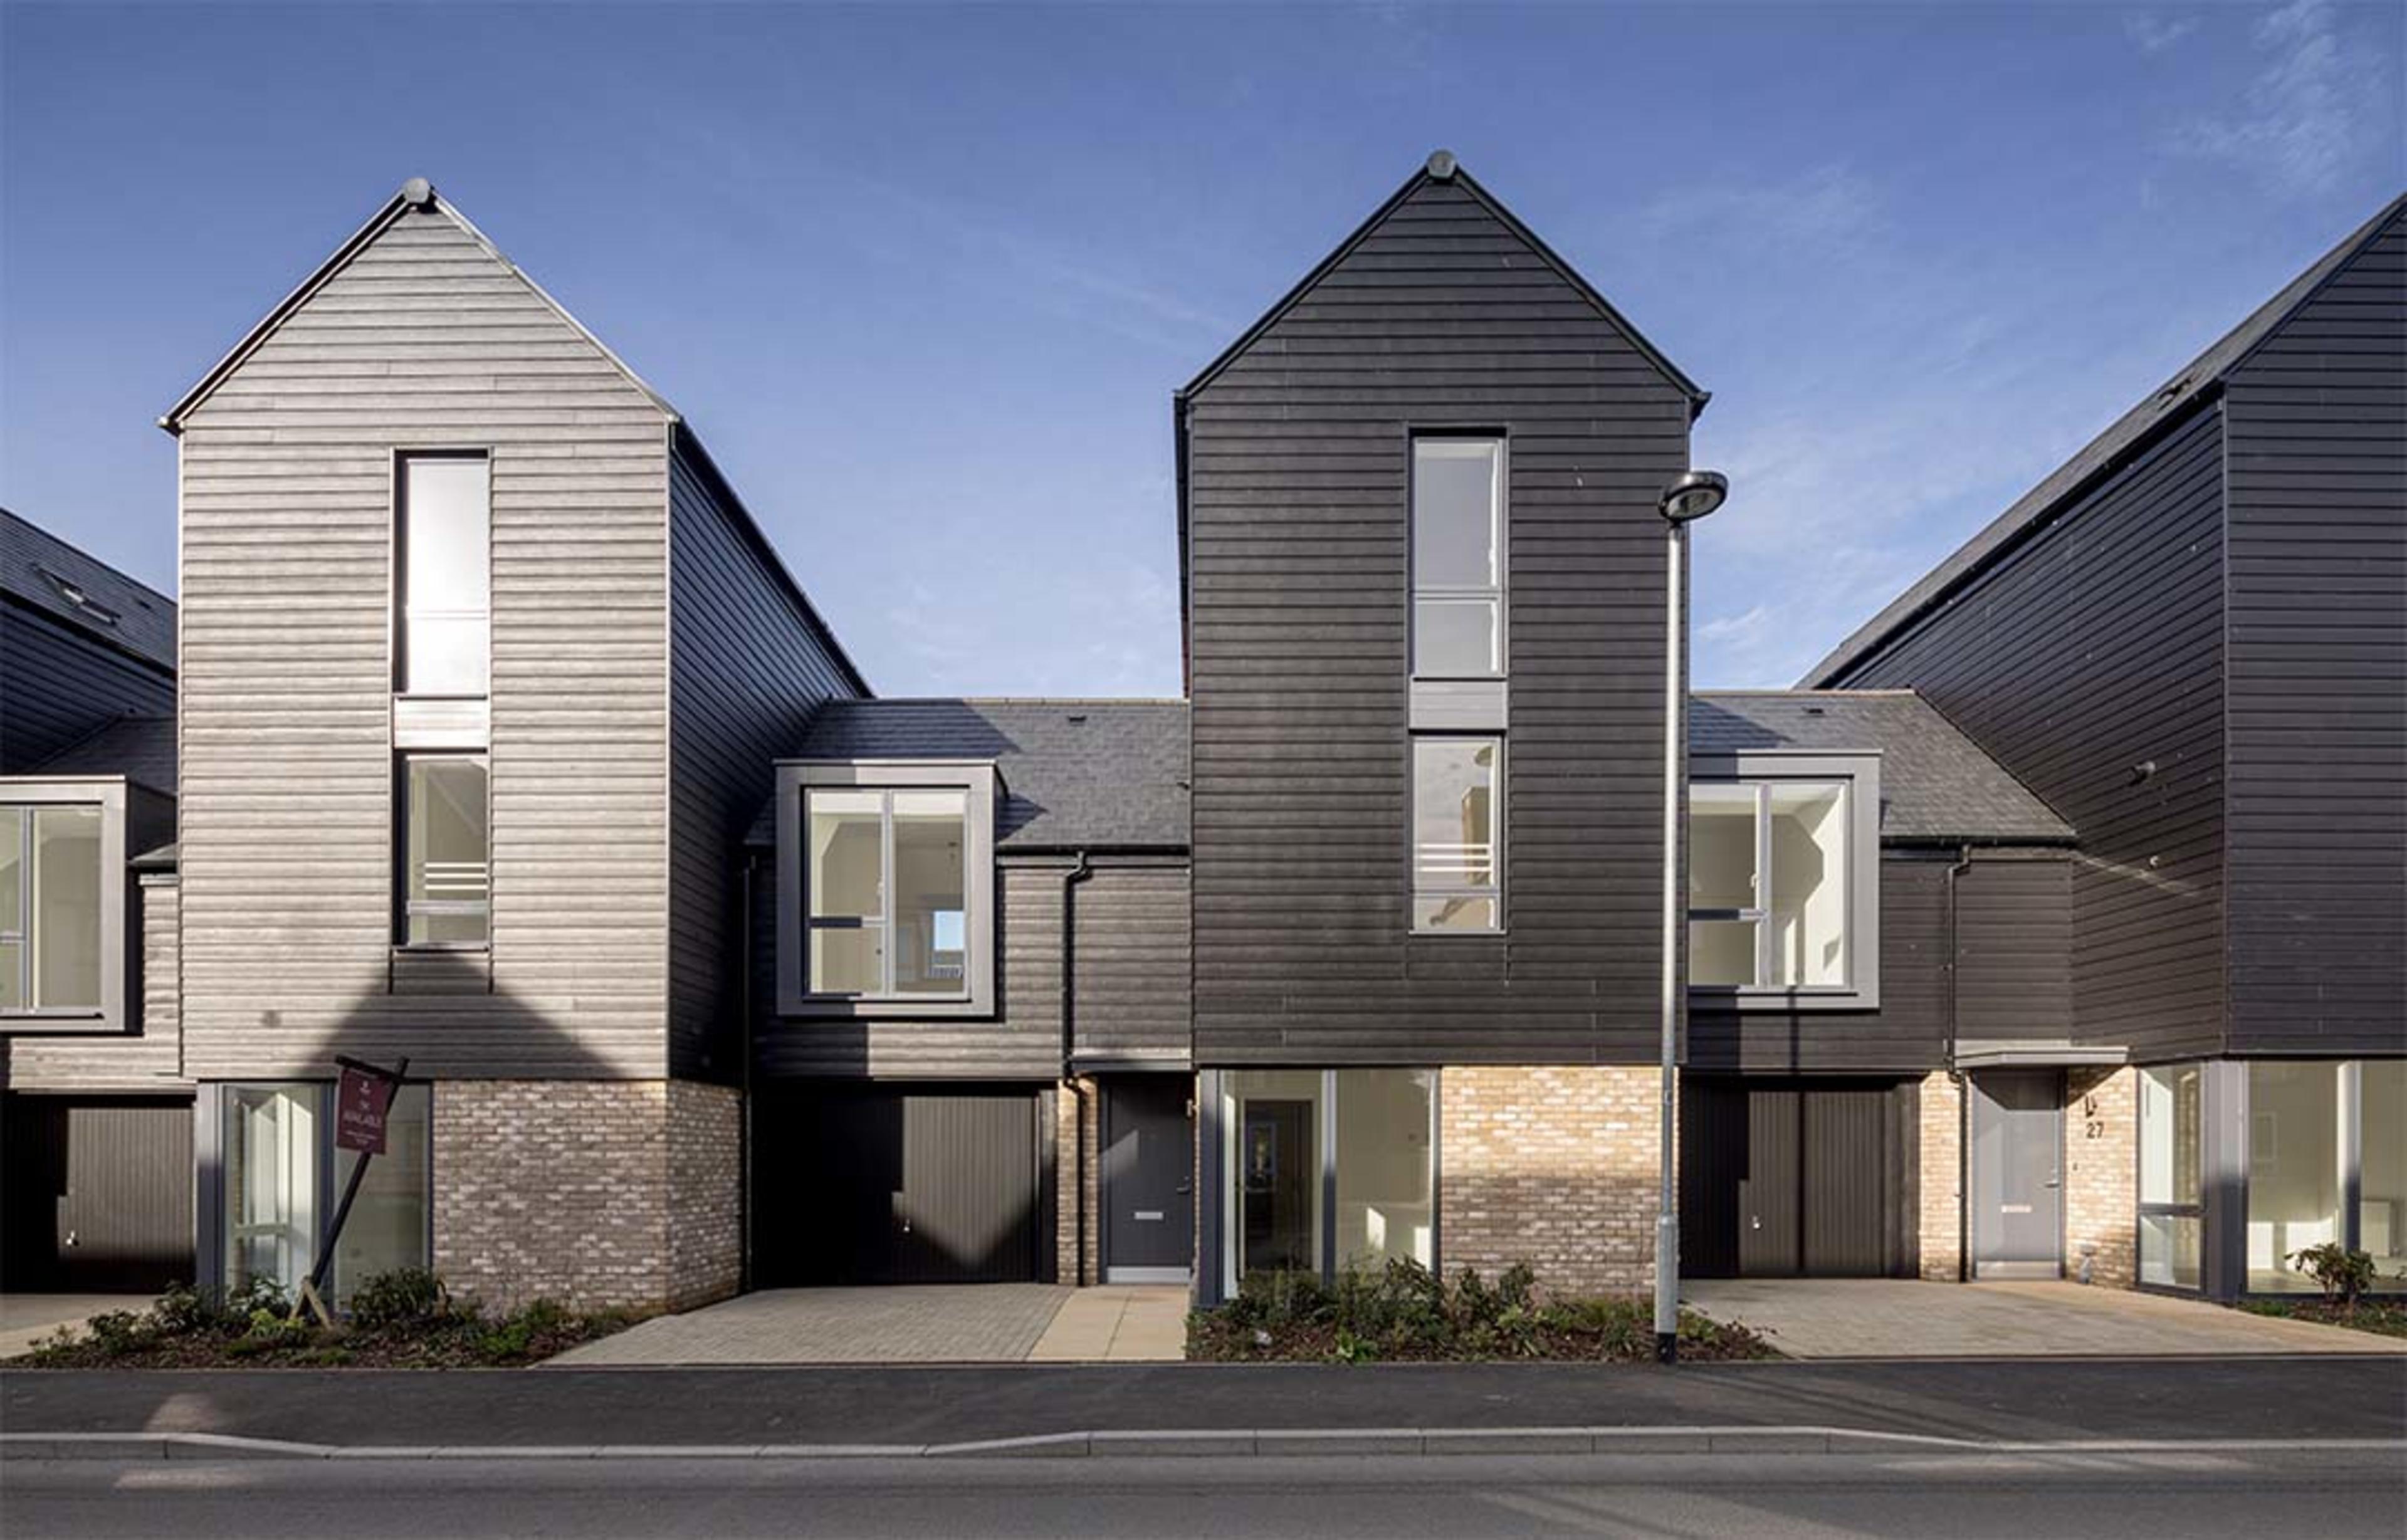 Two link detached homes with grey frontage, tall windows and driveways